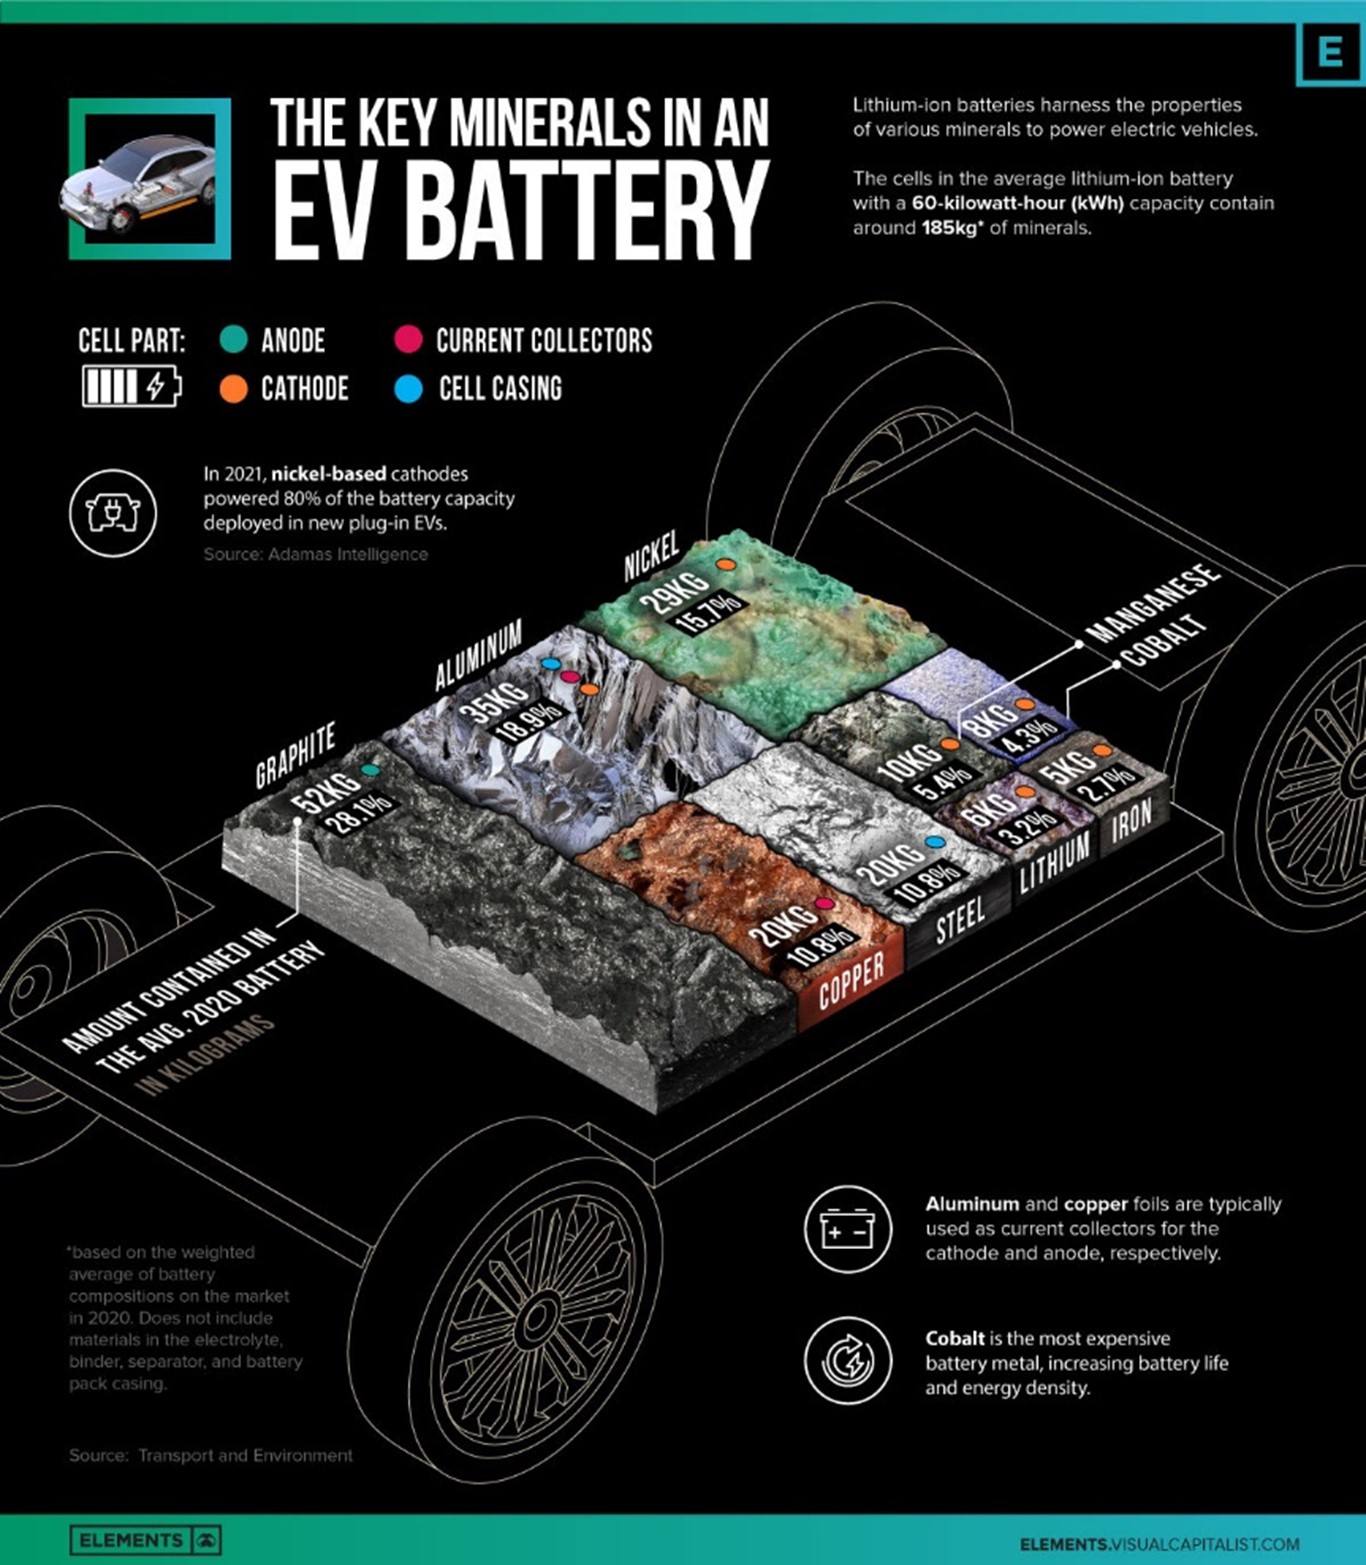 There is a lot more than lithium in a "lithium" battery